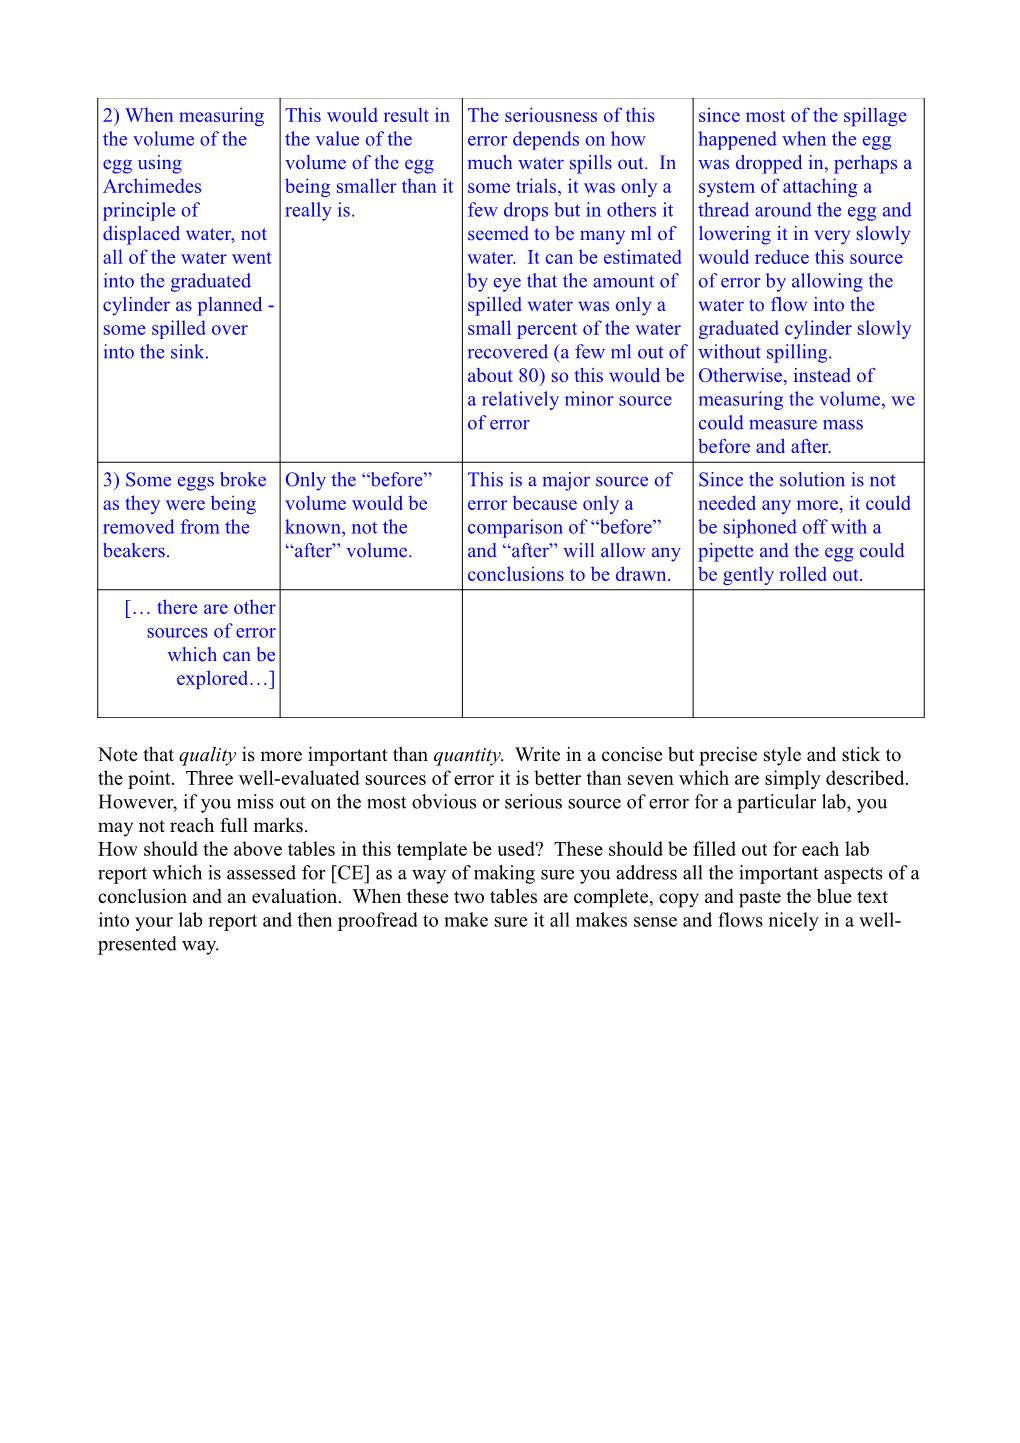 Template for CE - Conclusion and Evaluation